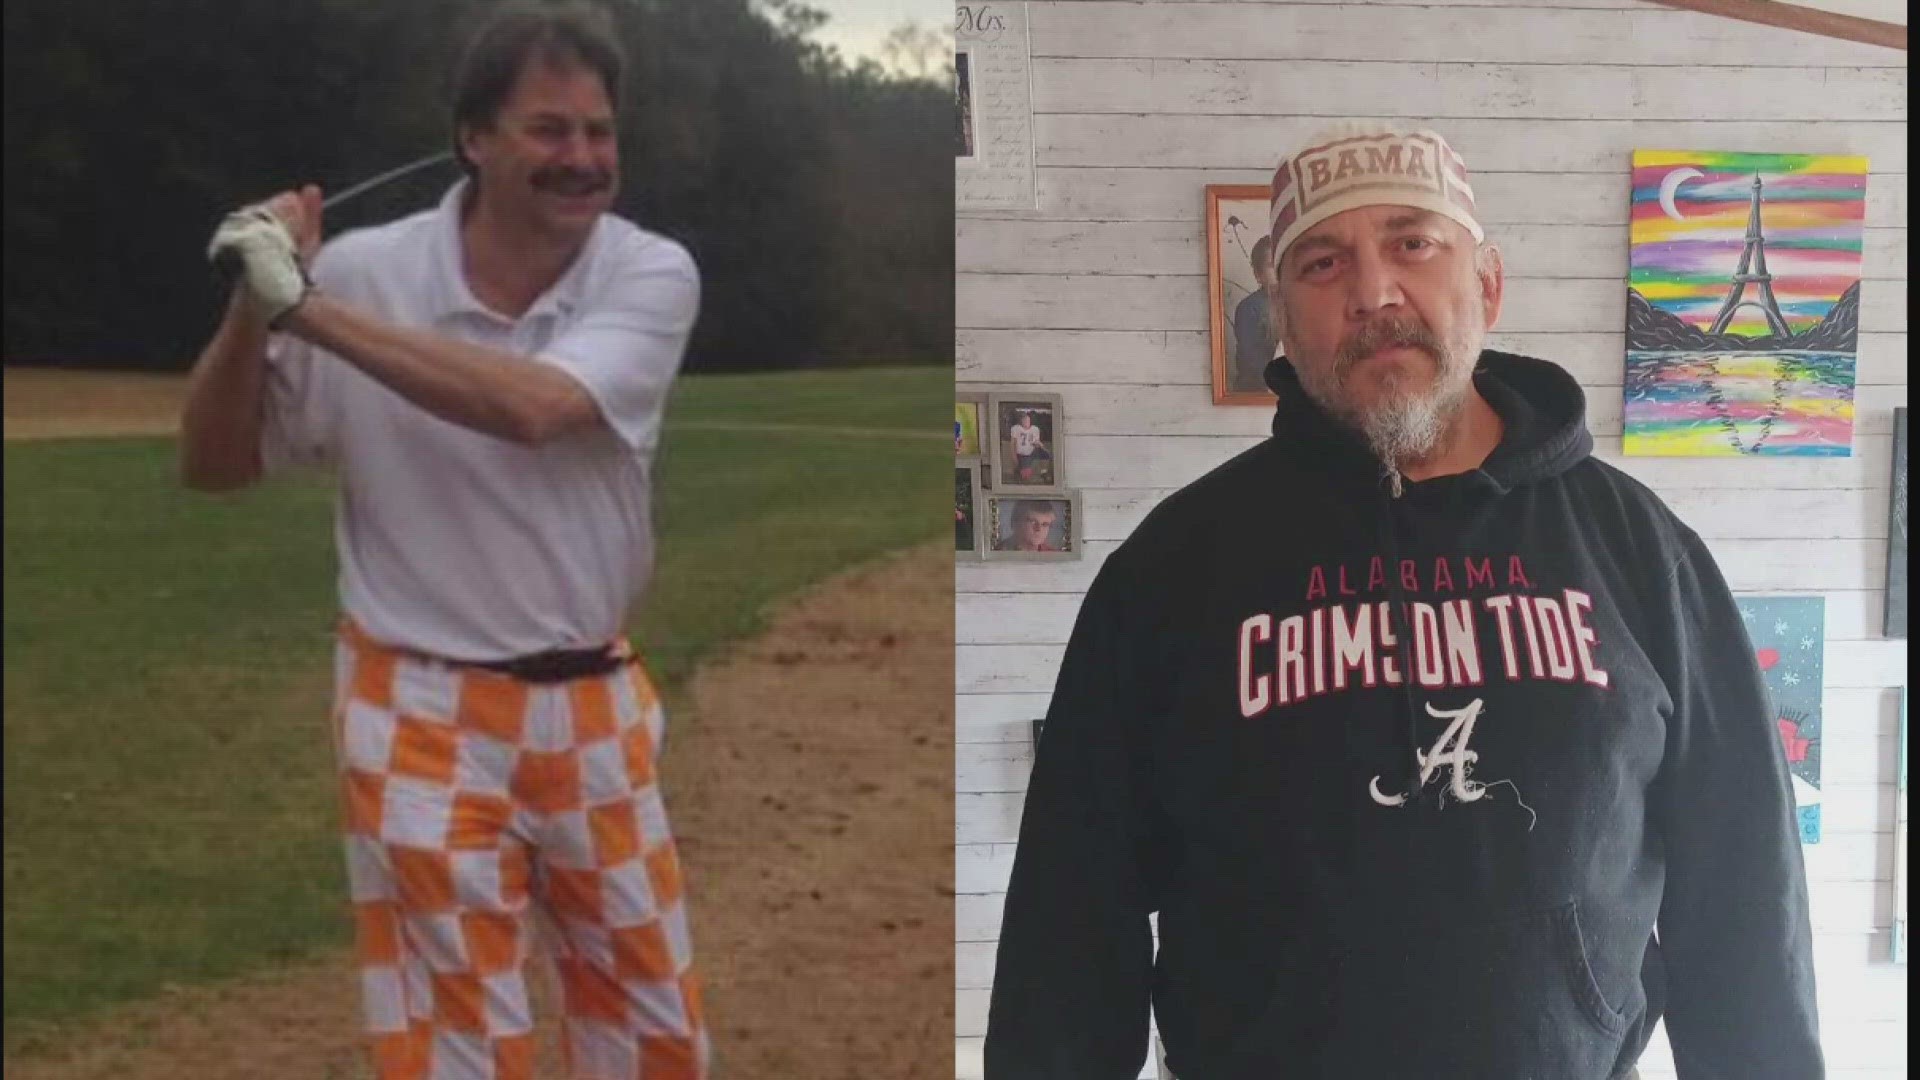 Two East Tennesseans show love for their teams in the Tennessee and Alabama rivalry, while in enemy territory.